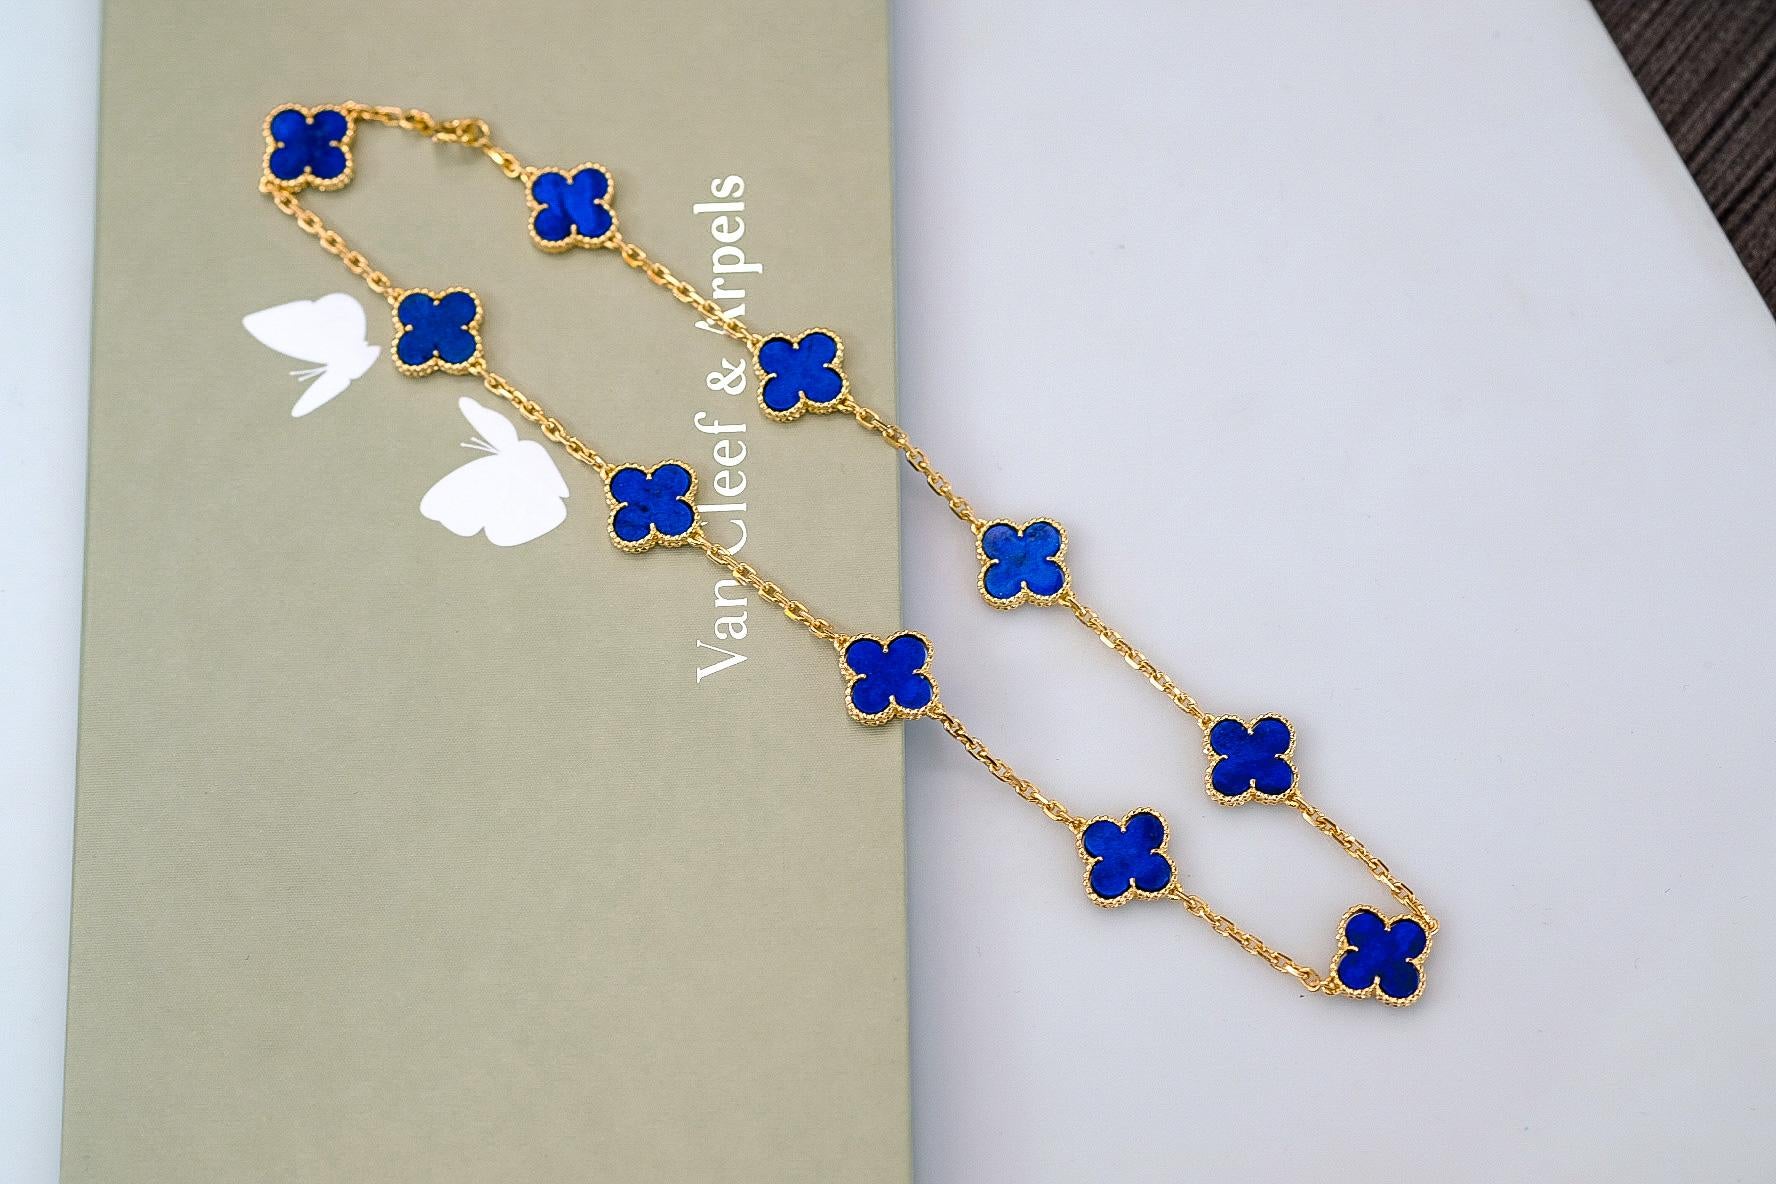 Van Cleef & Arpels 18k Gold 10 Motif Alhambra Lapis Necklace. Crafted from luxurious 18k yellow gold, this exquisite necklace features ten iconic Alhambra motifs adorned with lapis lazuli stones, each measuring 15mm in diameter.

Weighing 22.9 grams